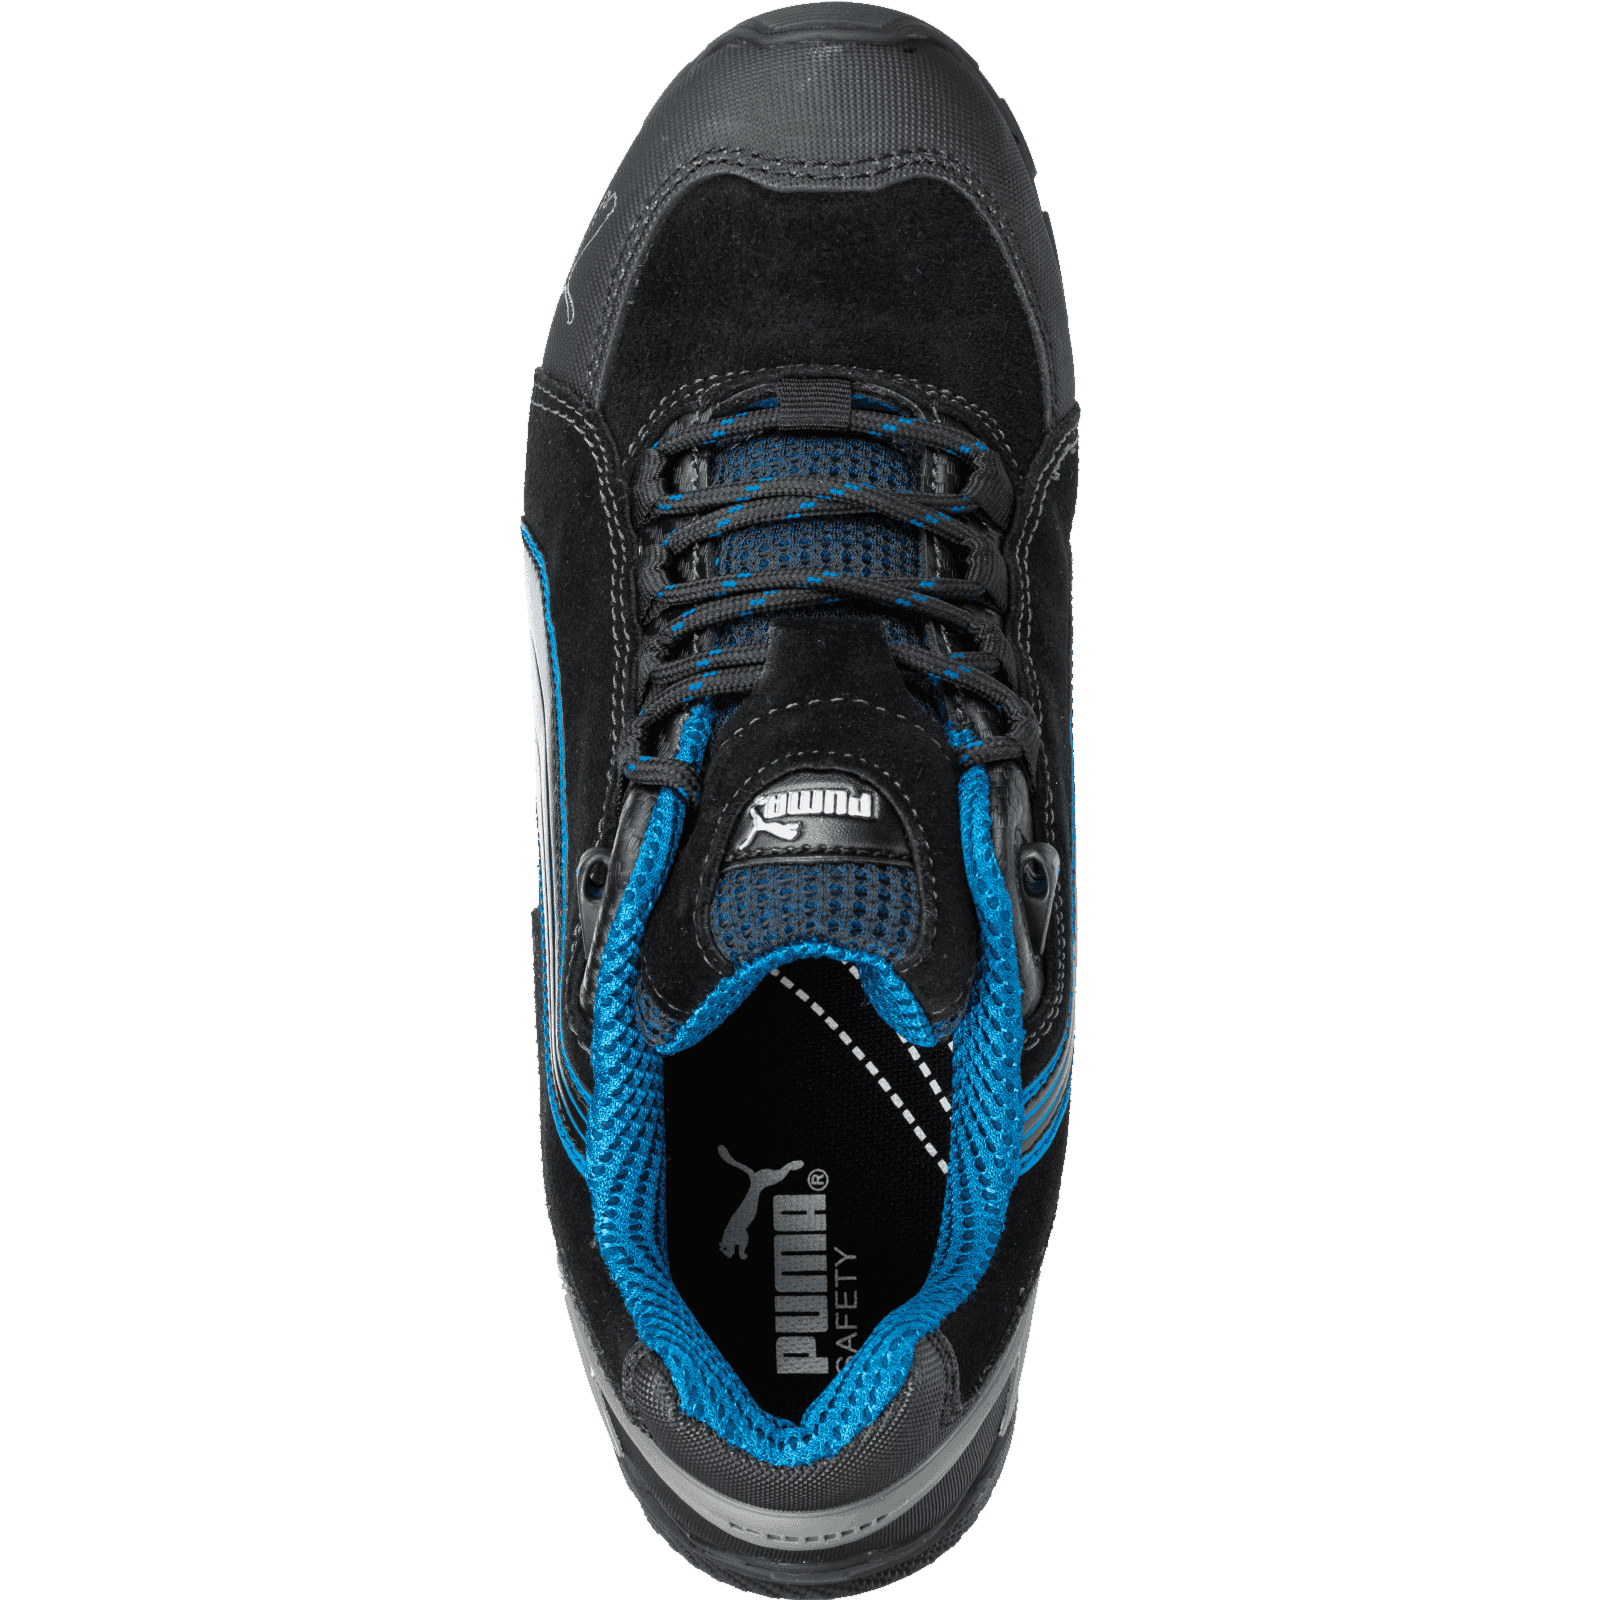 Rio Low Top S3 Safety Trainers Puma